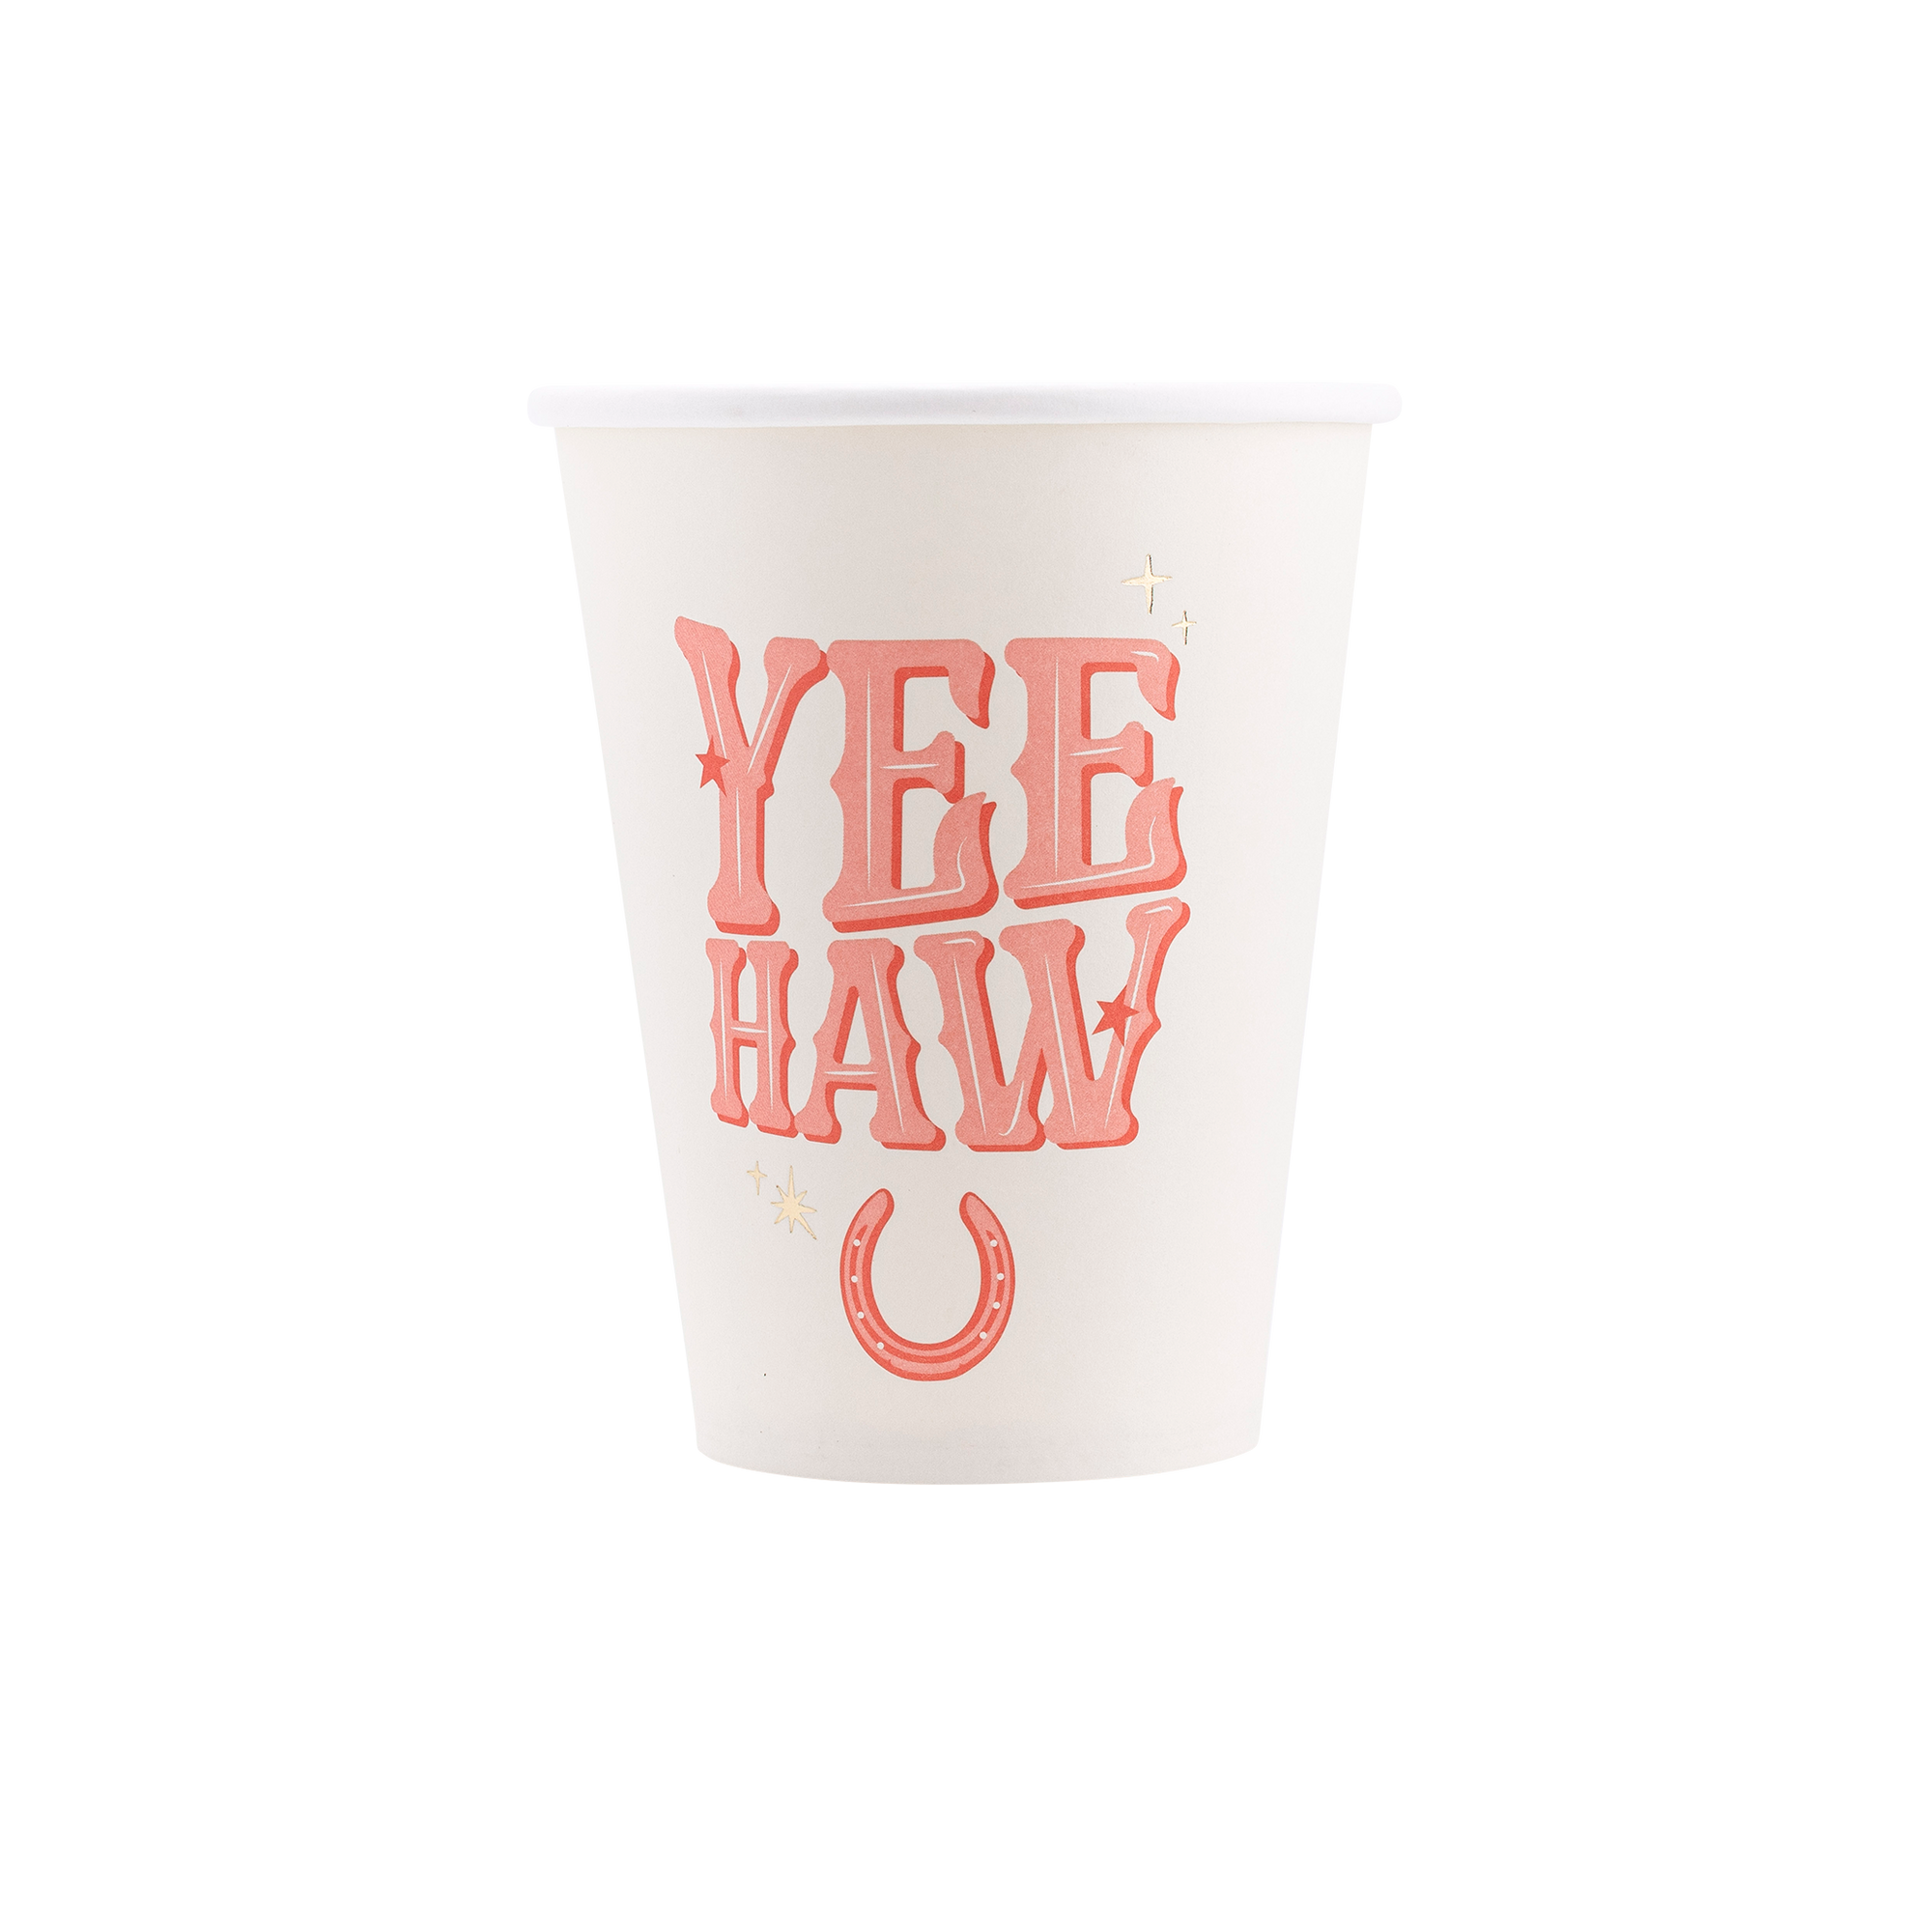 Yeehaw Paper Party Cups